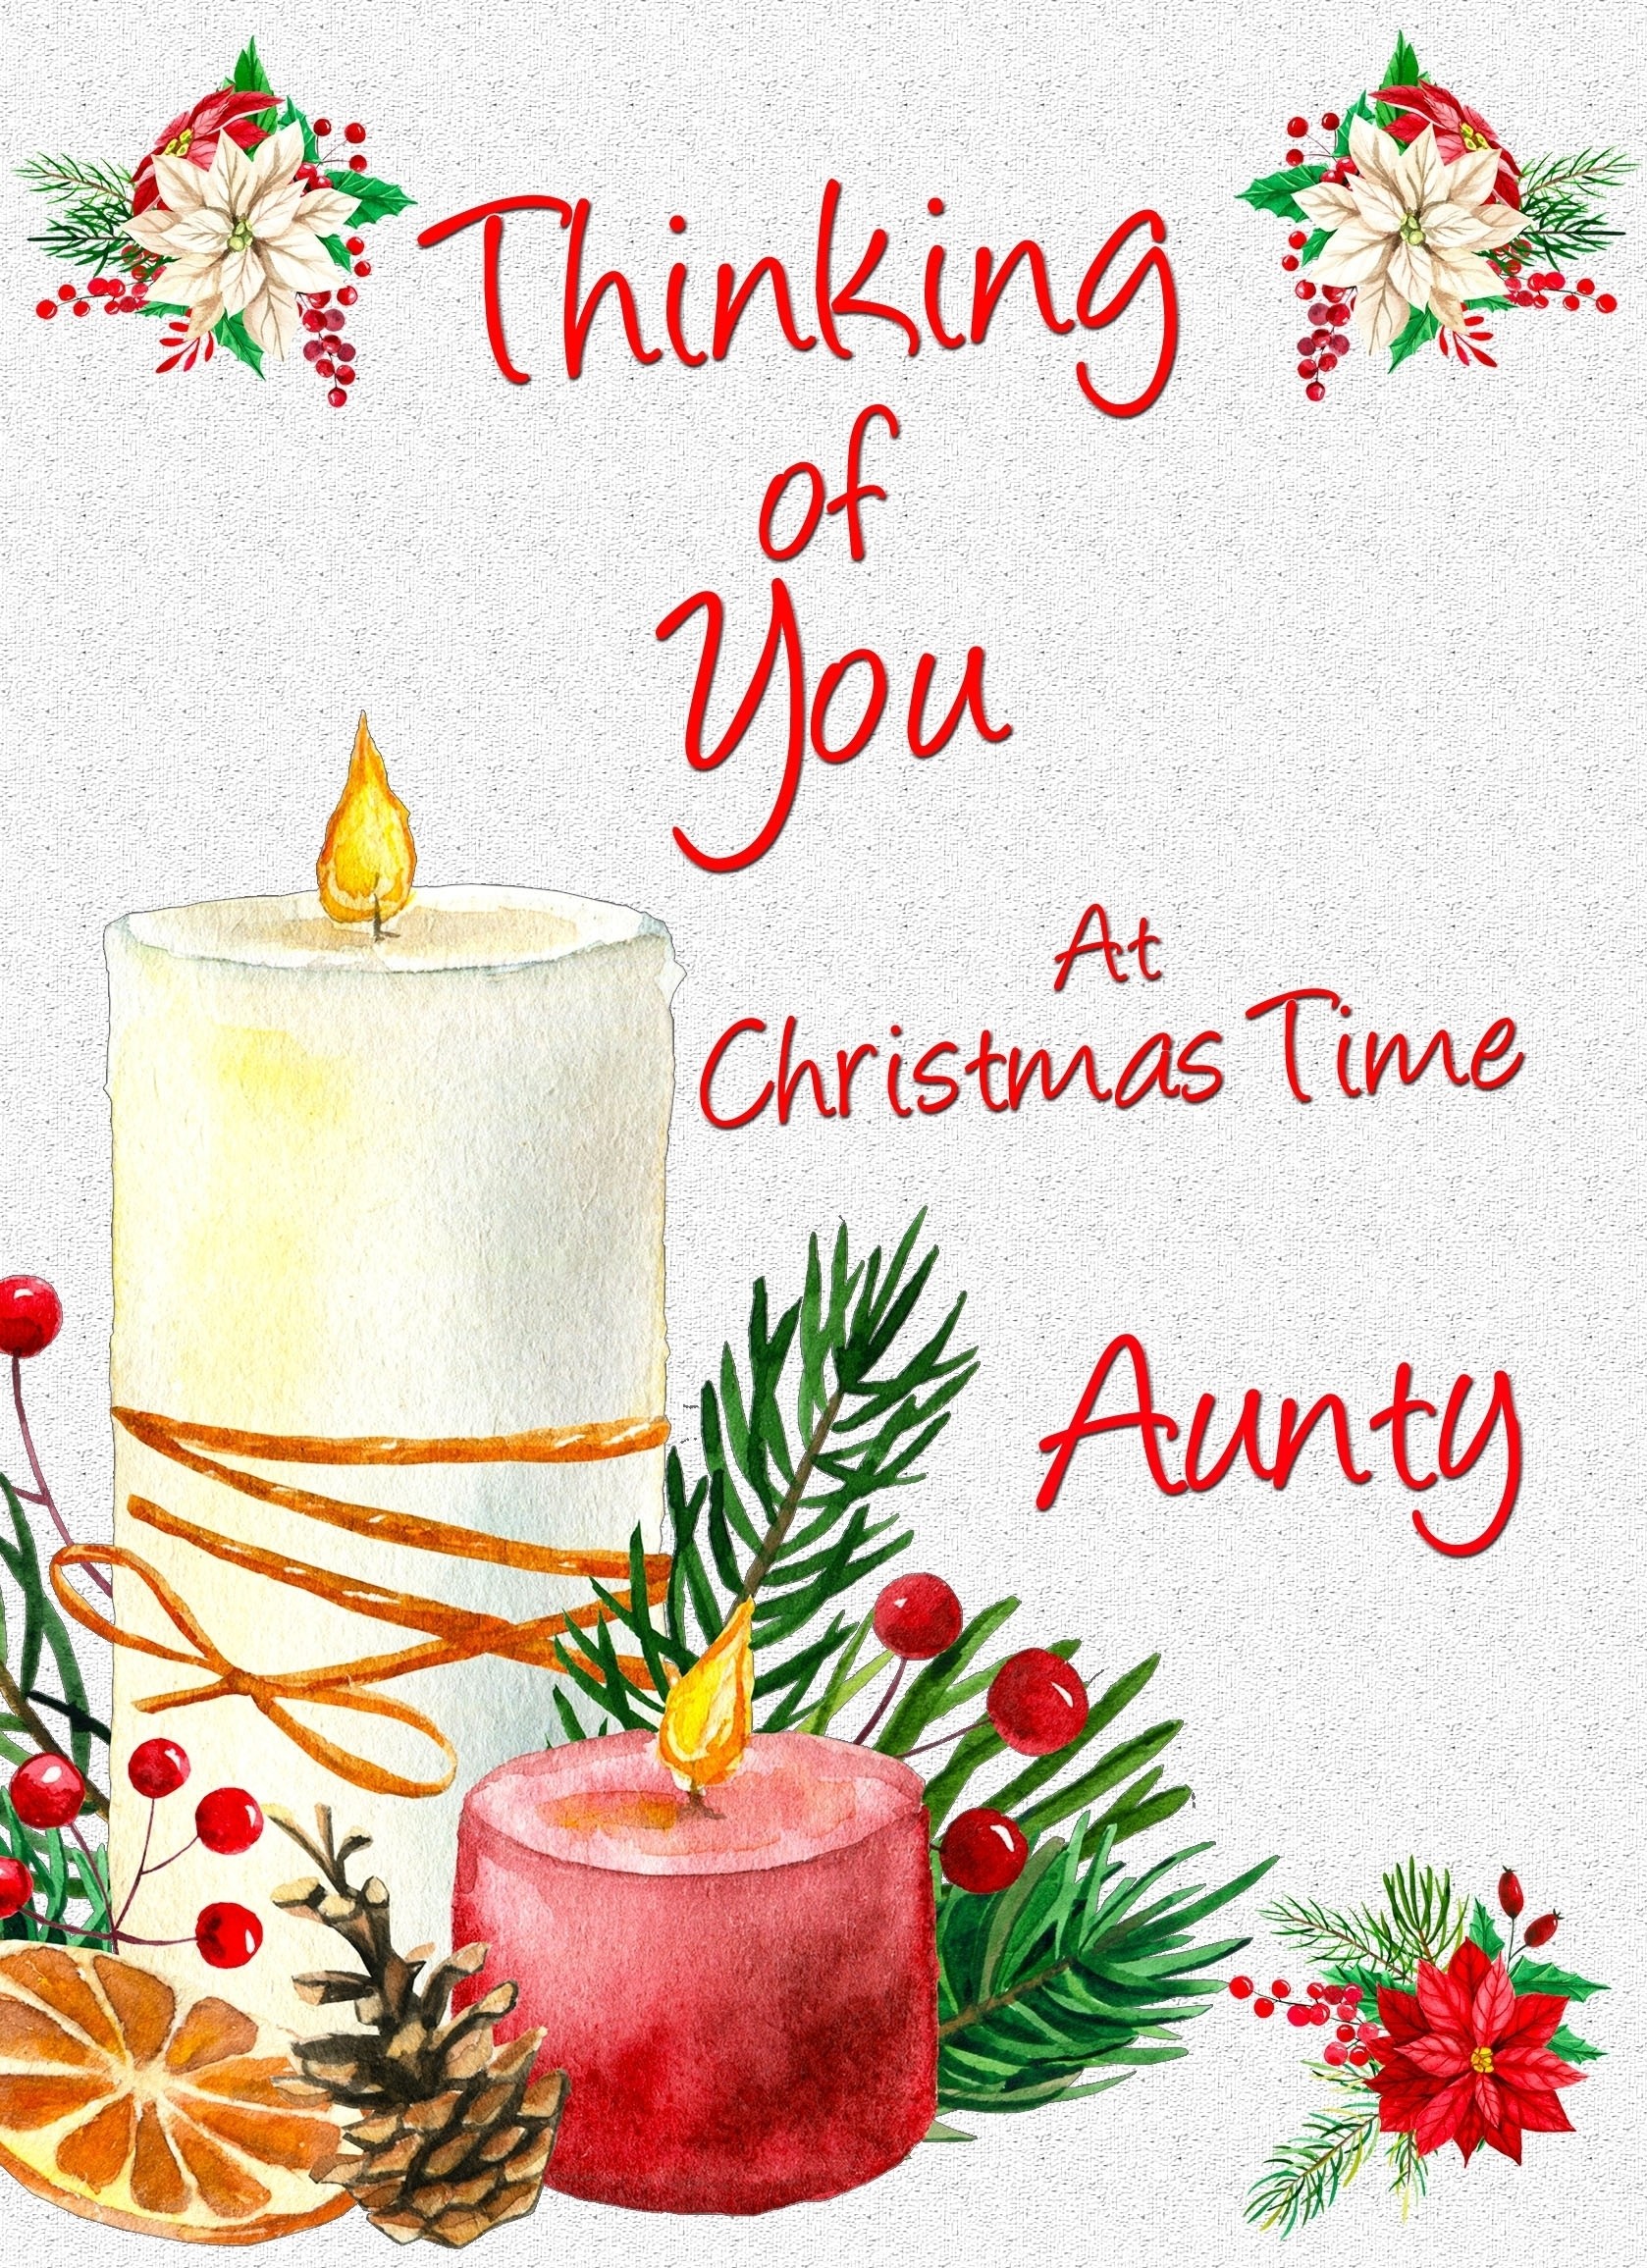 Thinking of You at Christmas Card For Aunty (Candle)